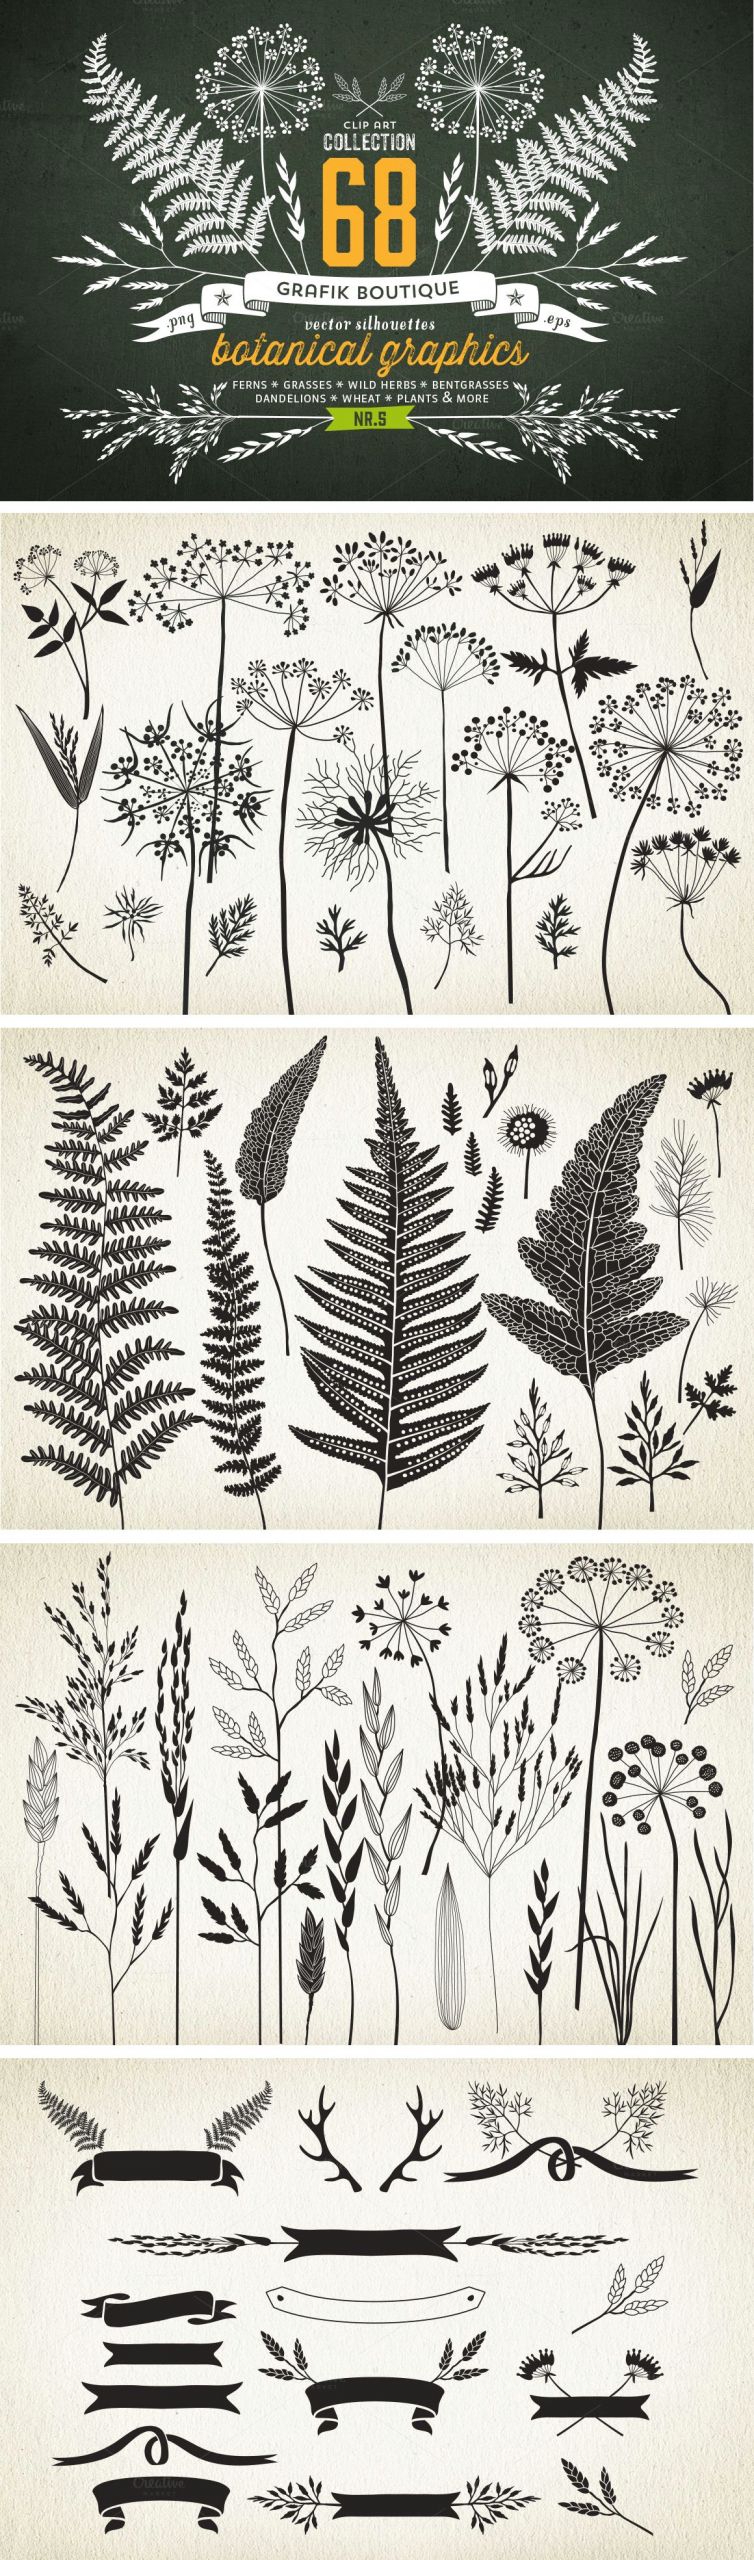 Fern Drawing Easy Botanical Element Illustrations Idea Try Printing to